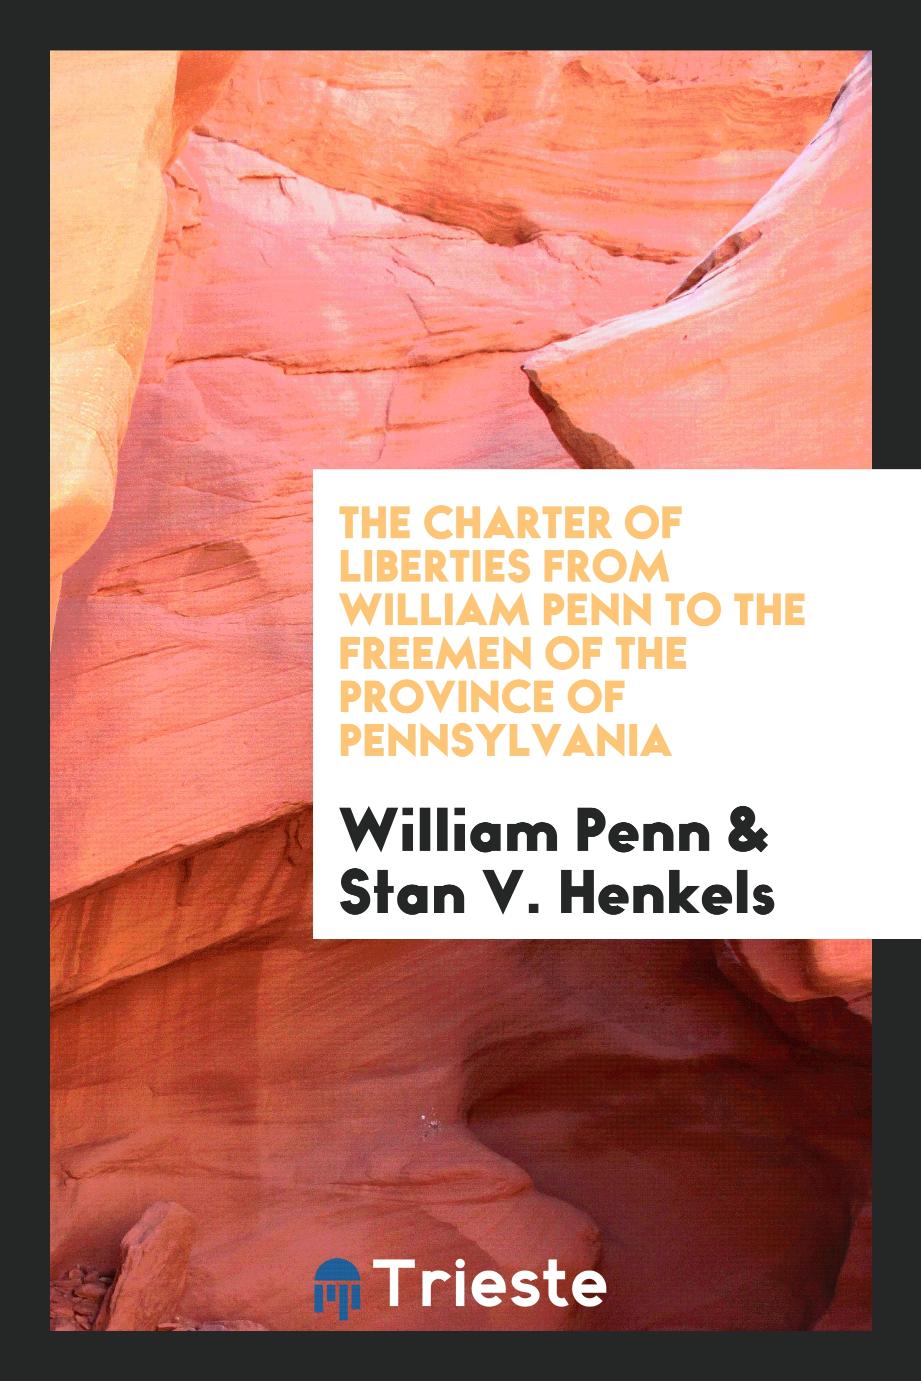 The charter of liberties from William Penn to the freemen of the province of Pennsylvania